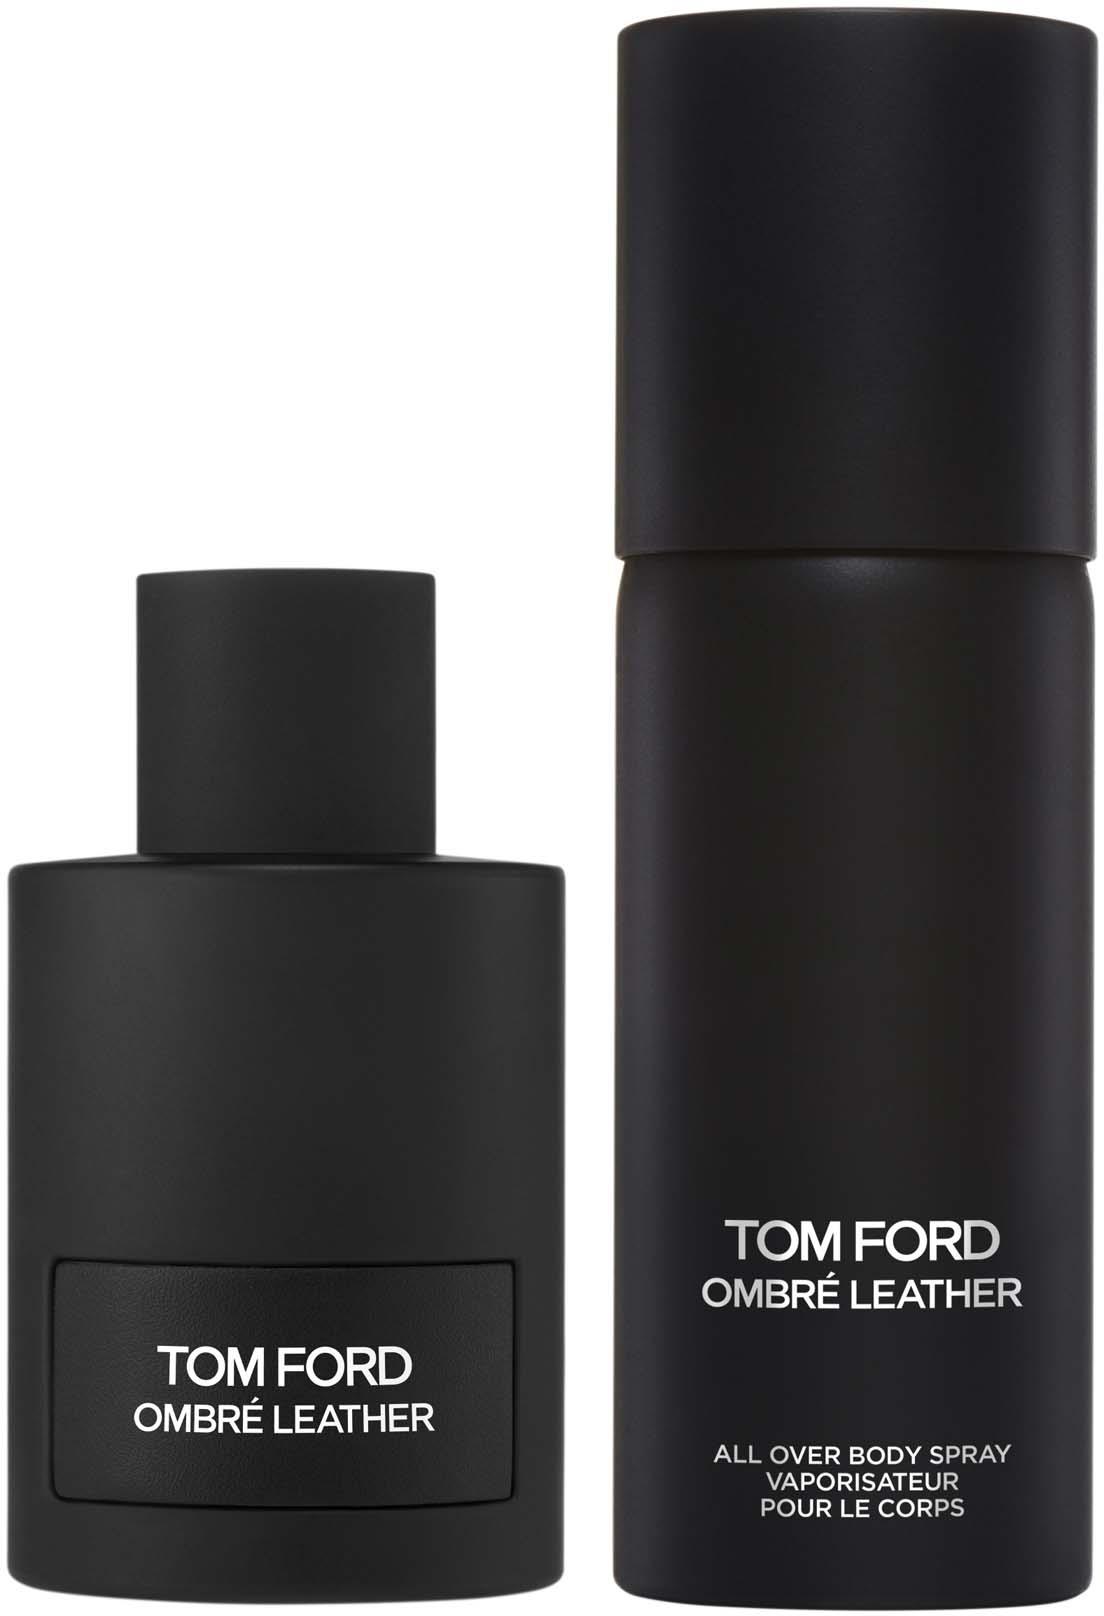 Tom Ford Ombre Leather Set With All Over Body Spray Set | lyko.com